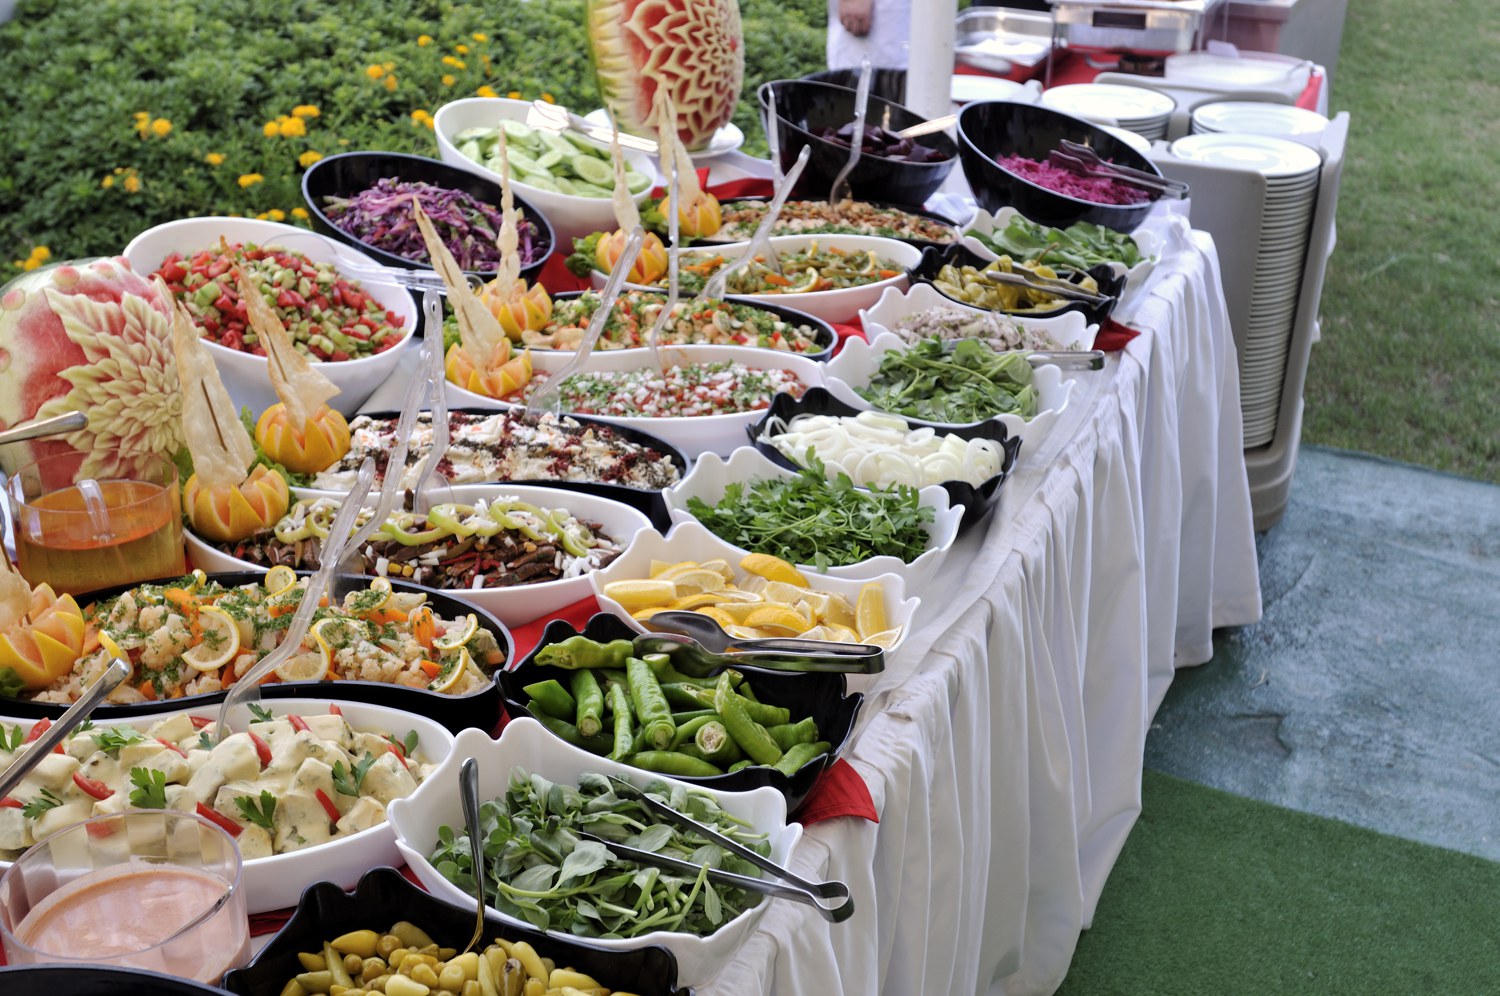 No one had anything to eat for most of the [wedding] reception